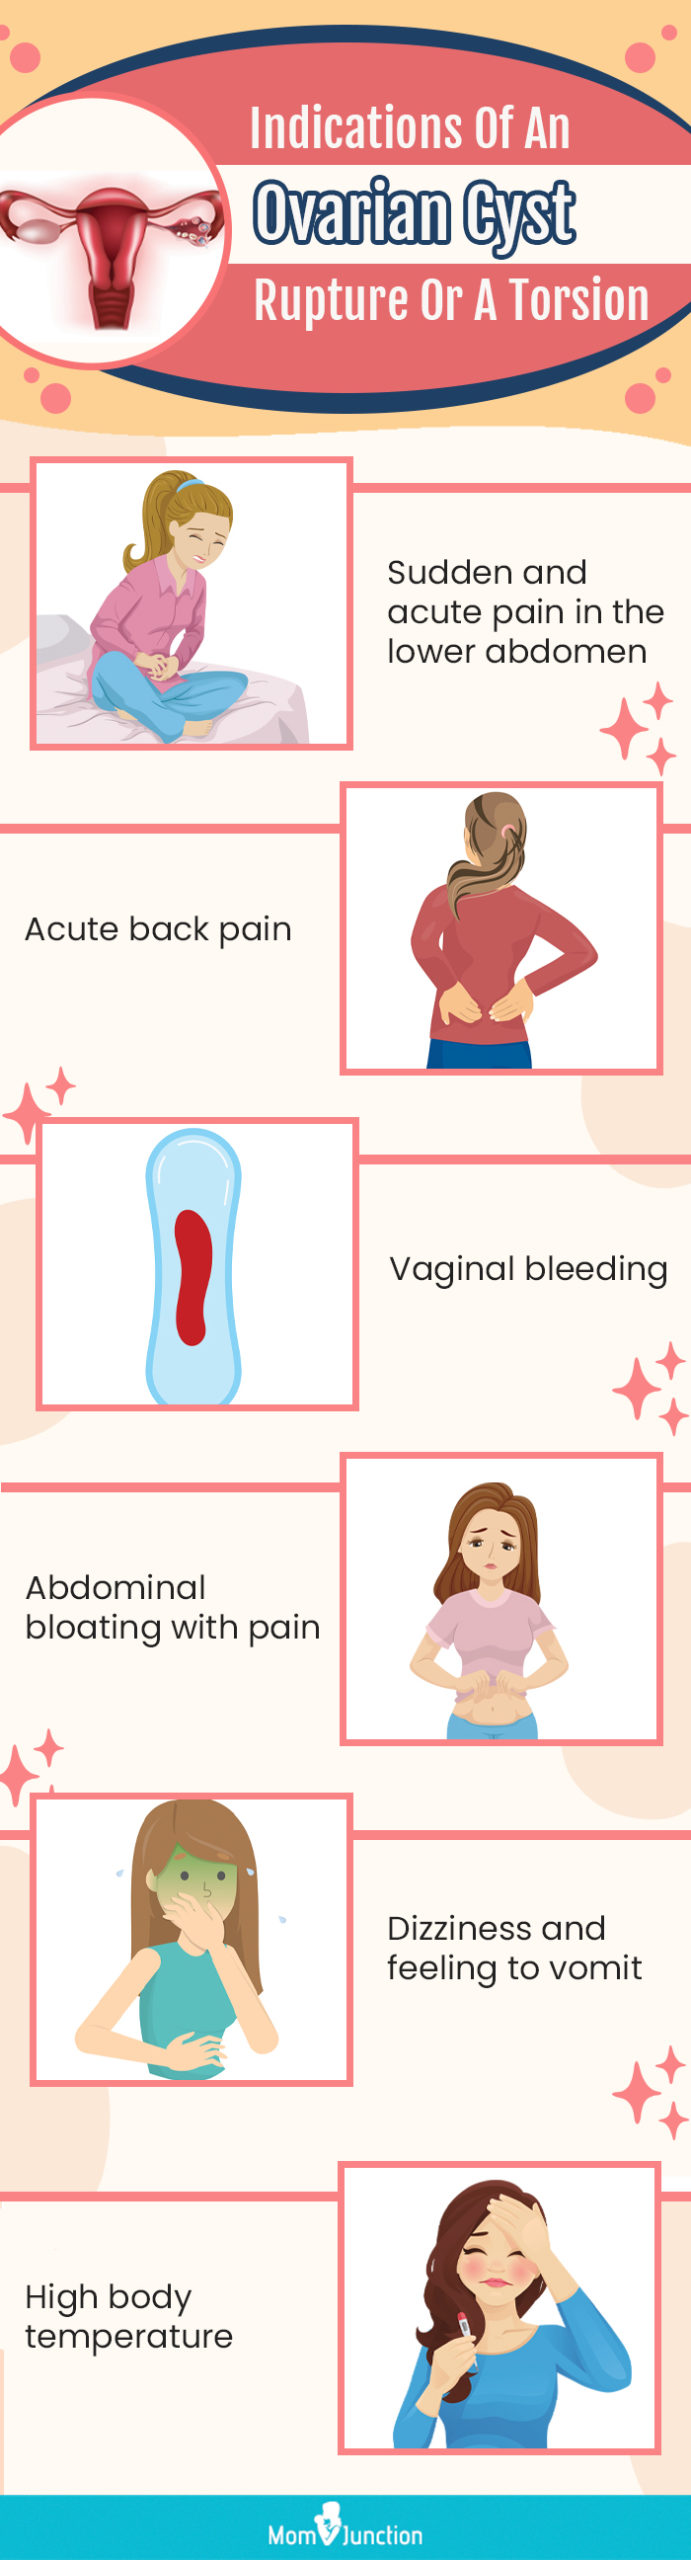 Symptoms for ruptured ovarian cyst - MEDizzy